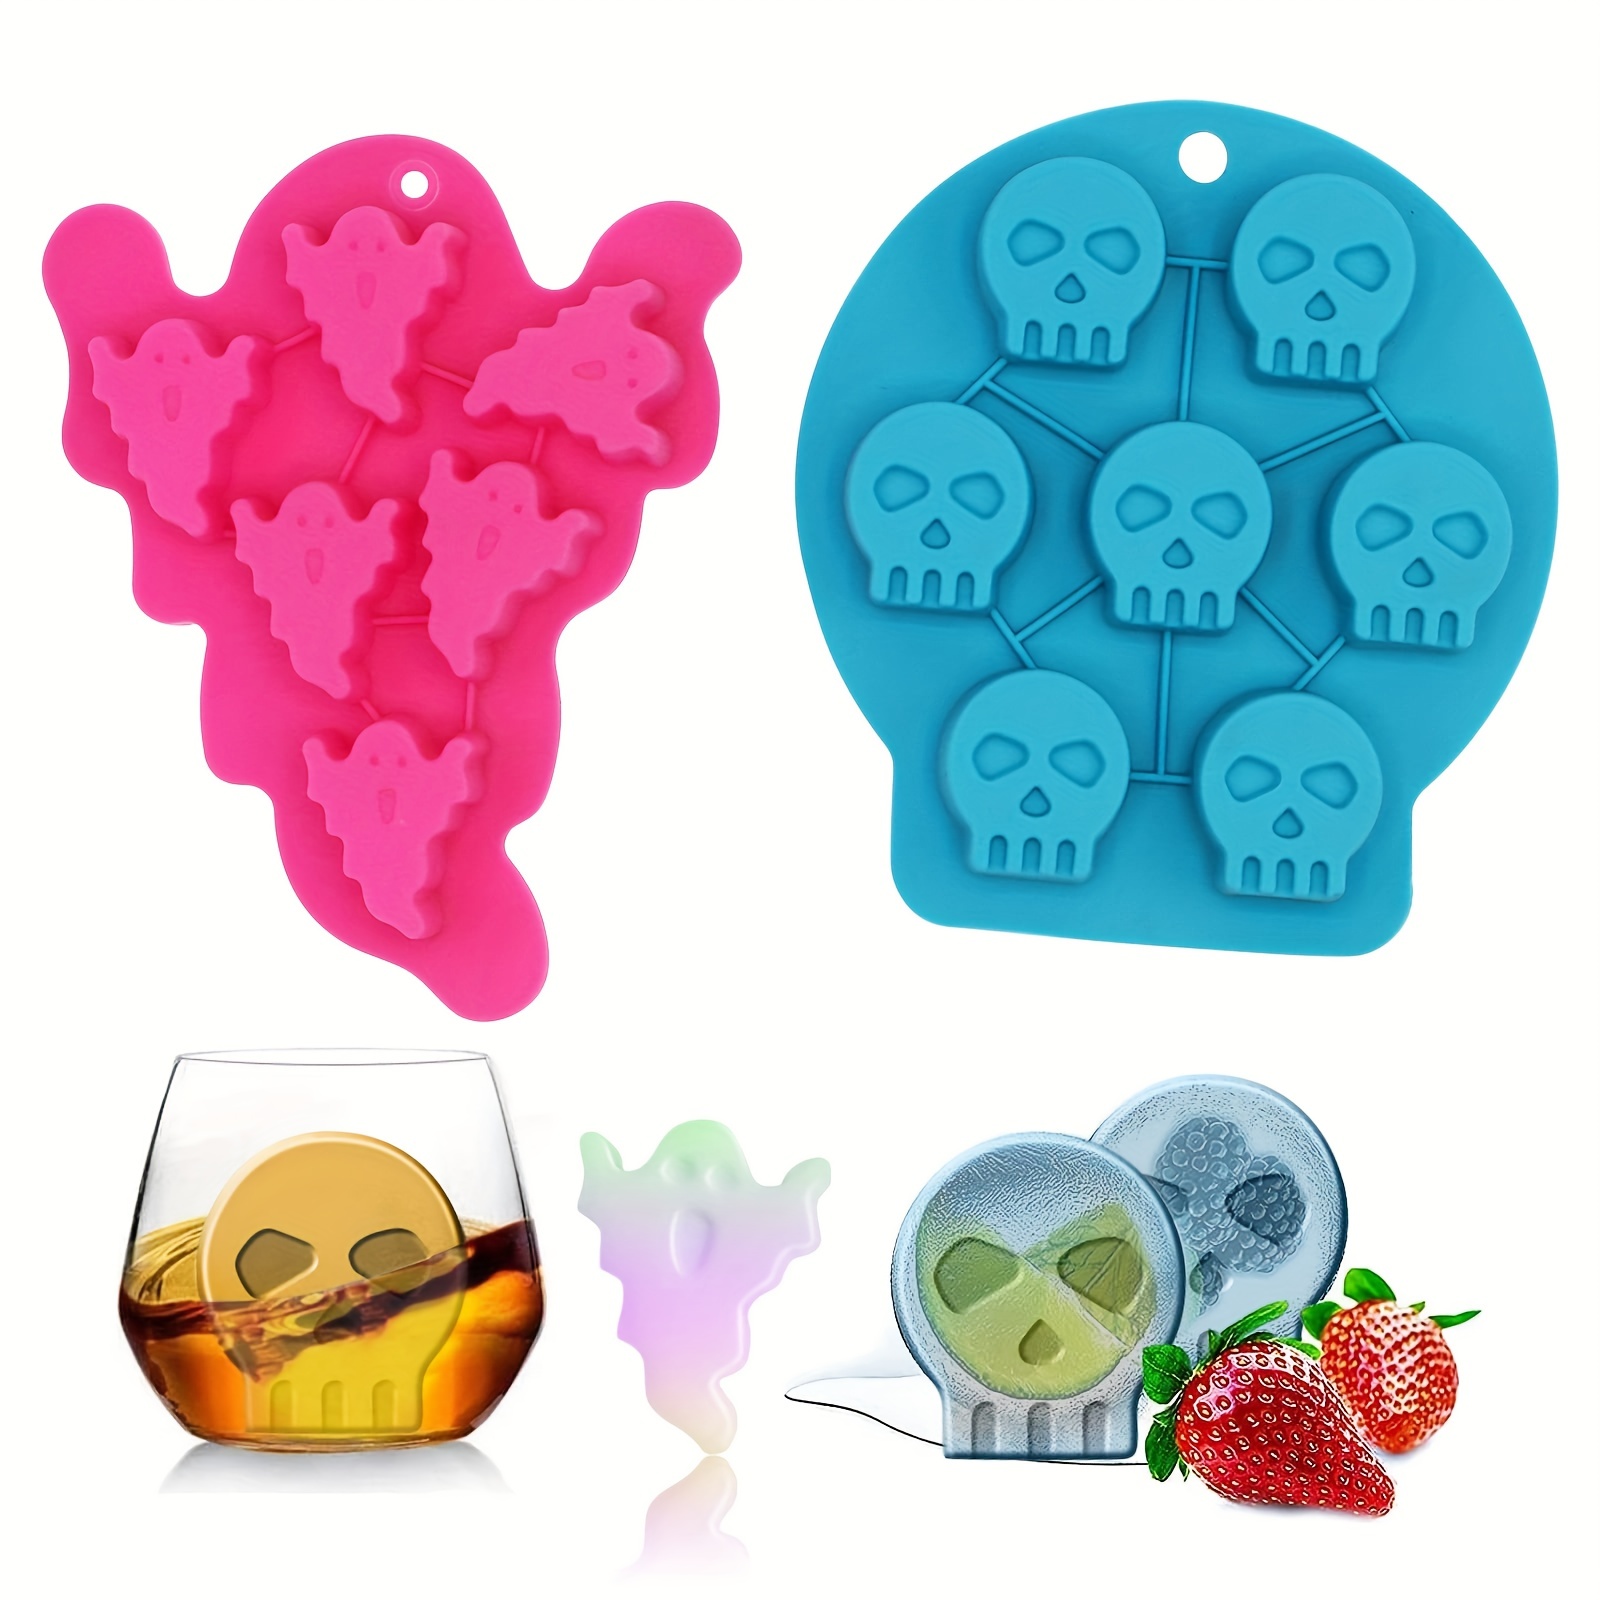 Star Wars Ice Cube Trays, Death Star Ice Maker Mold for Whiskey